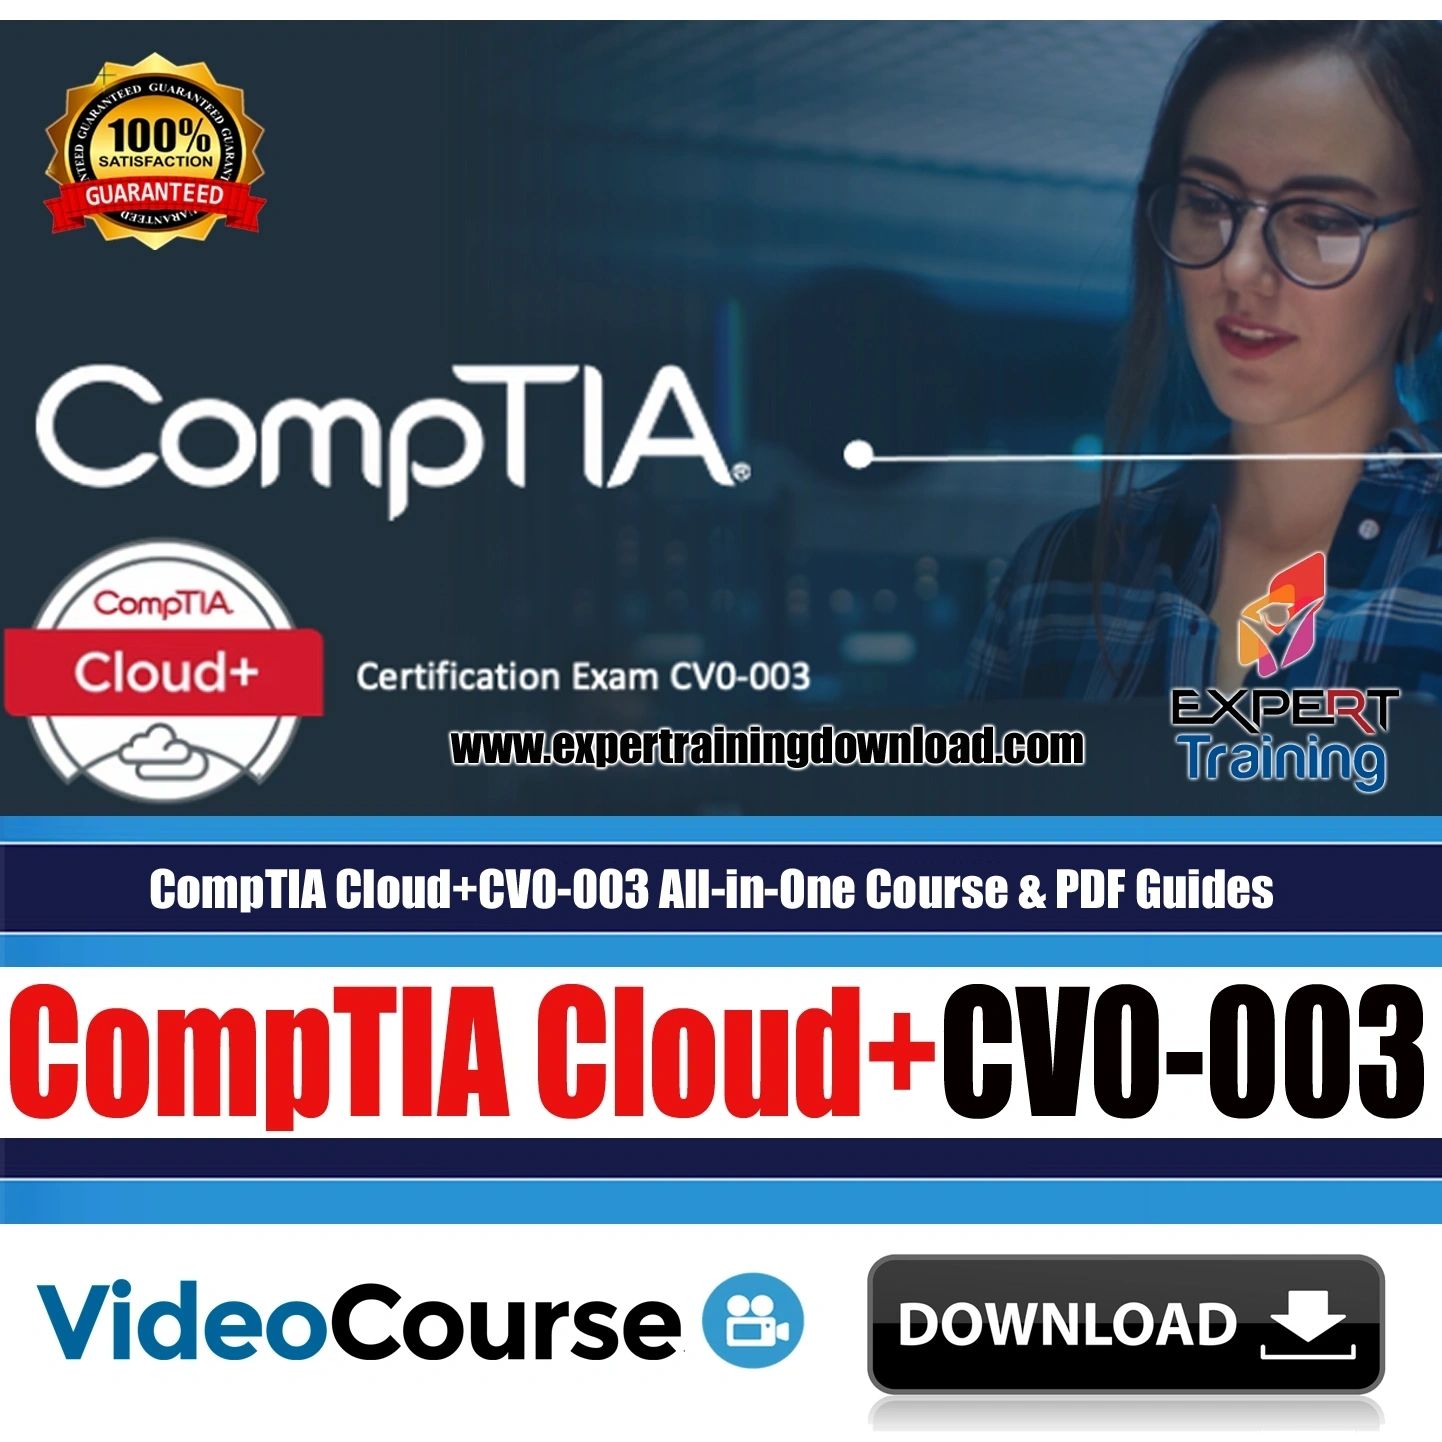 CompTIA Cloud+CV0-003 All-in-One Course & PDF Guides